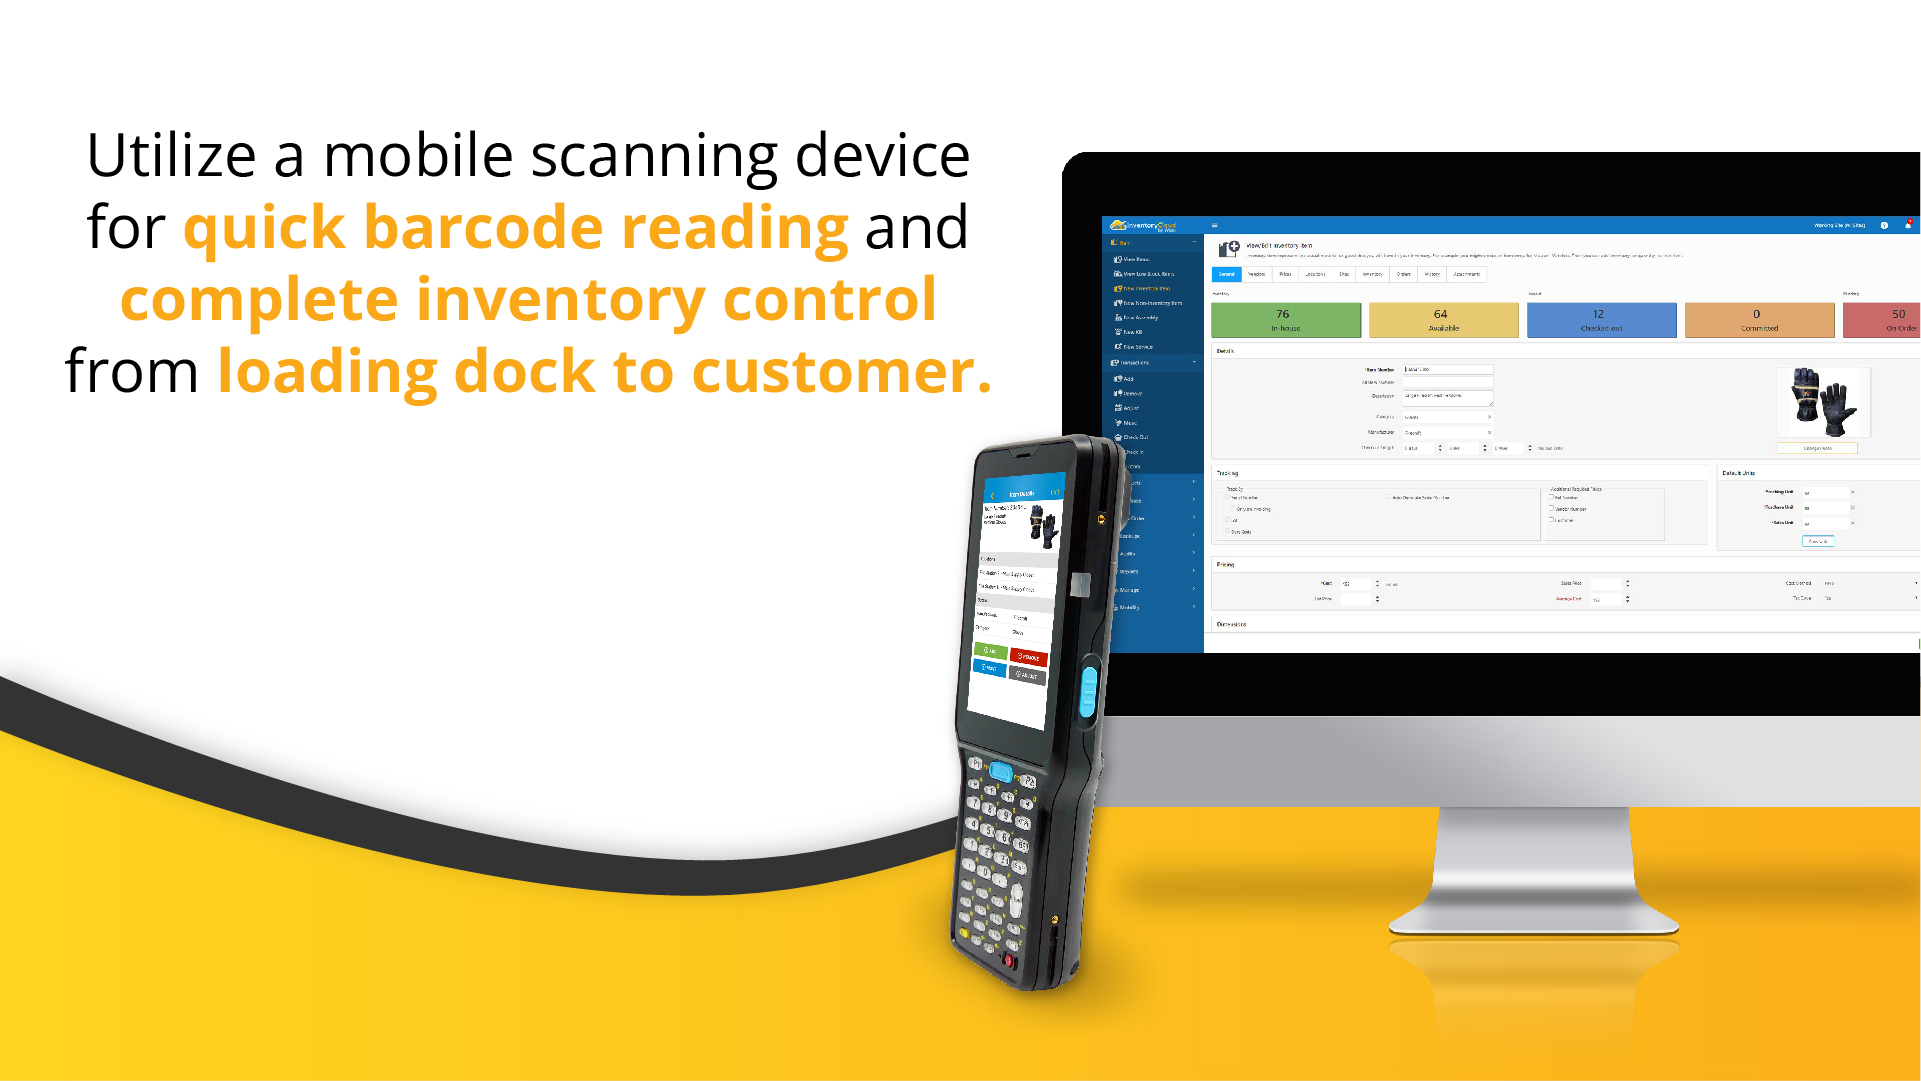 Utilize a mobile scanning device for quick barcode reading and complete inventory control from loading dock to customer